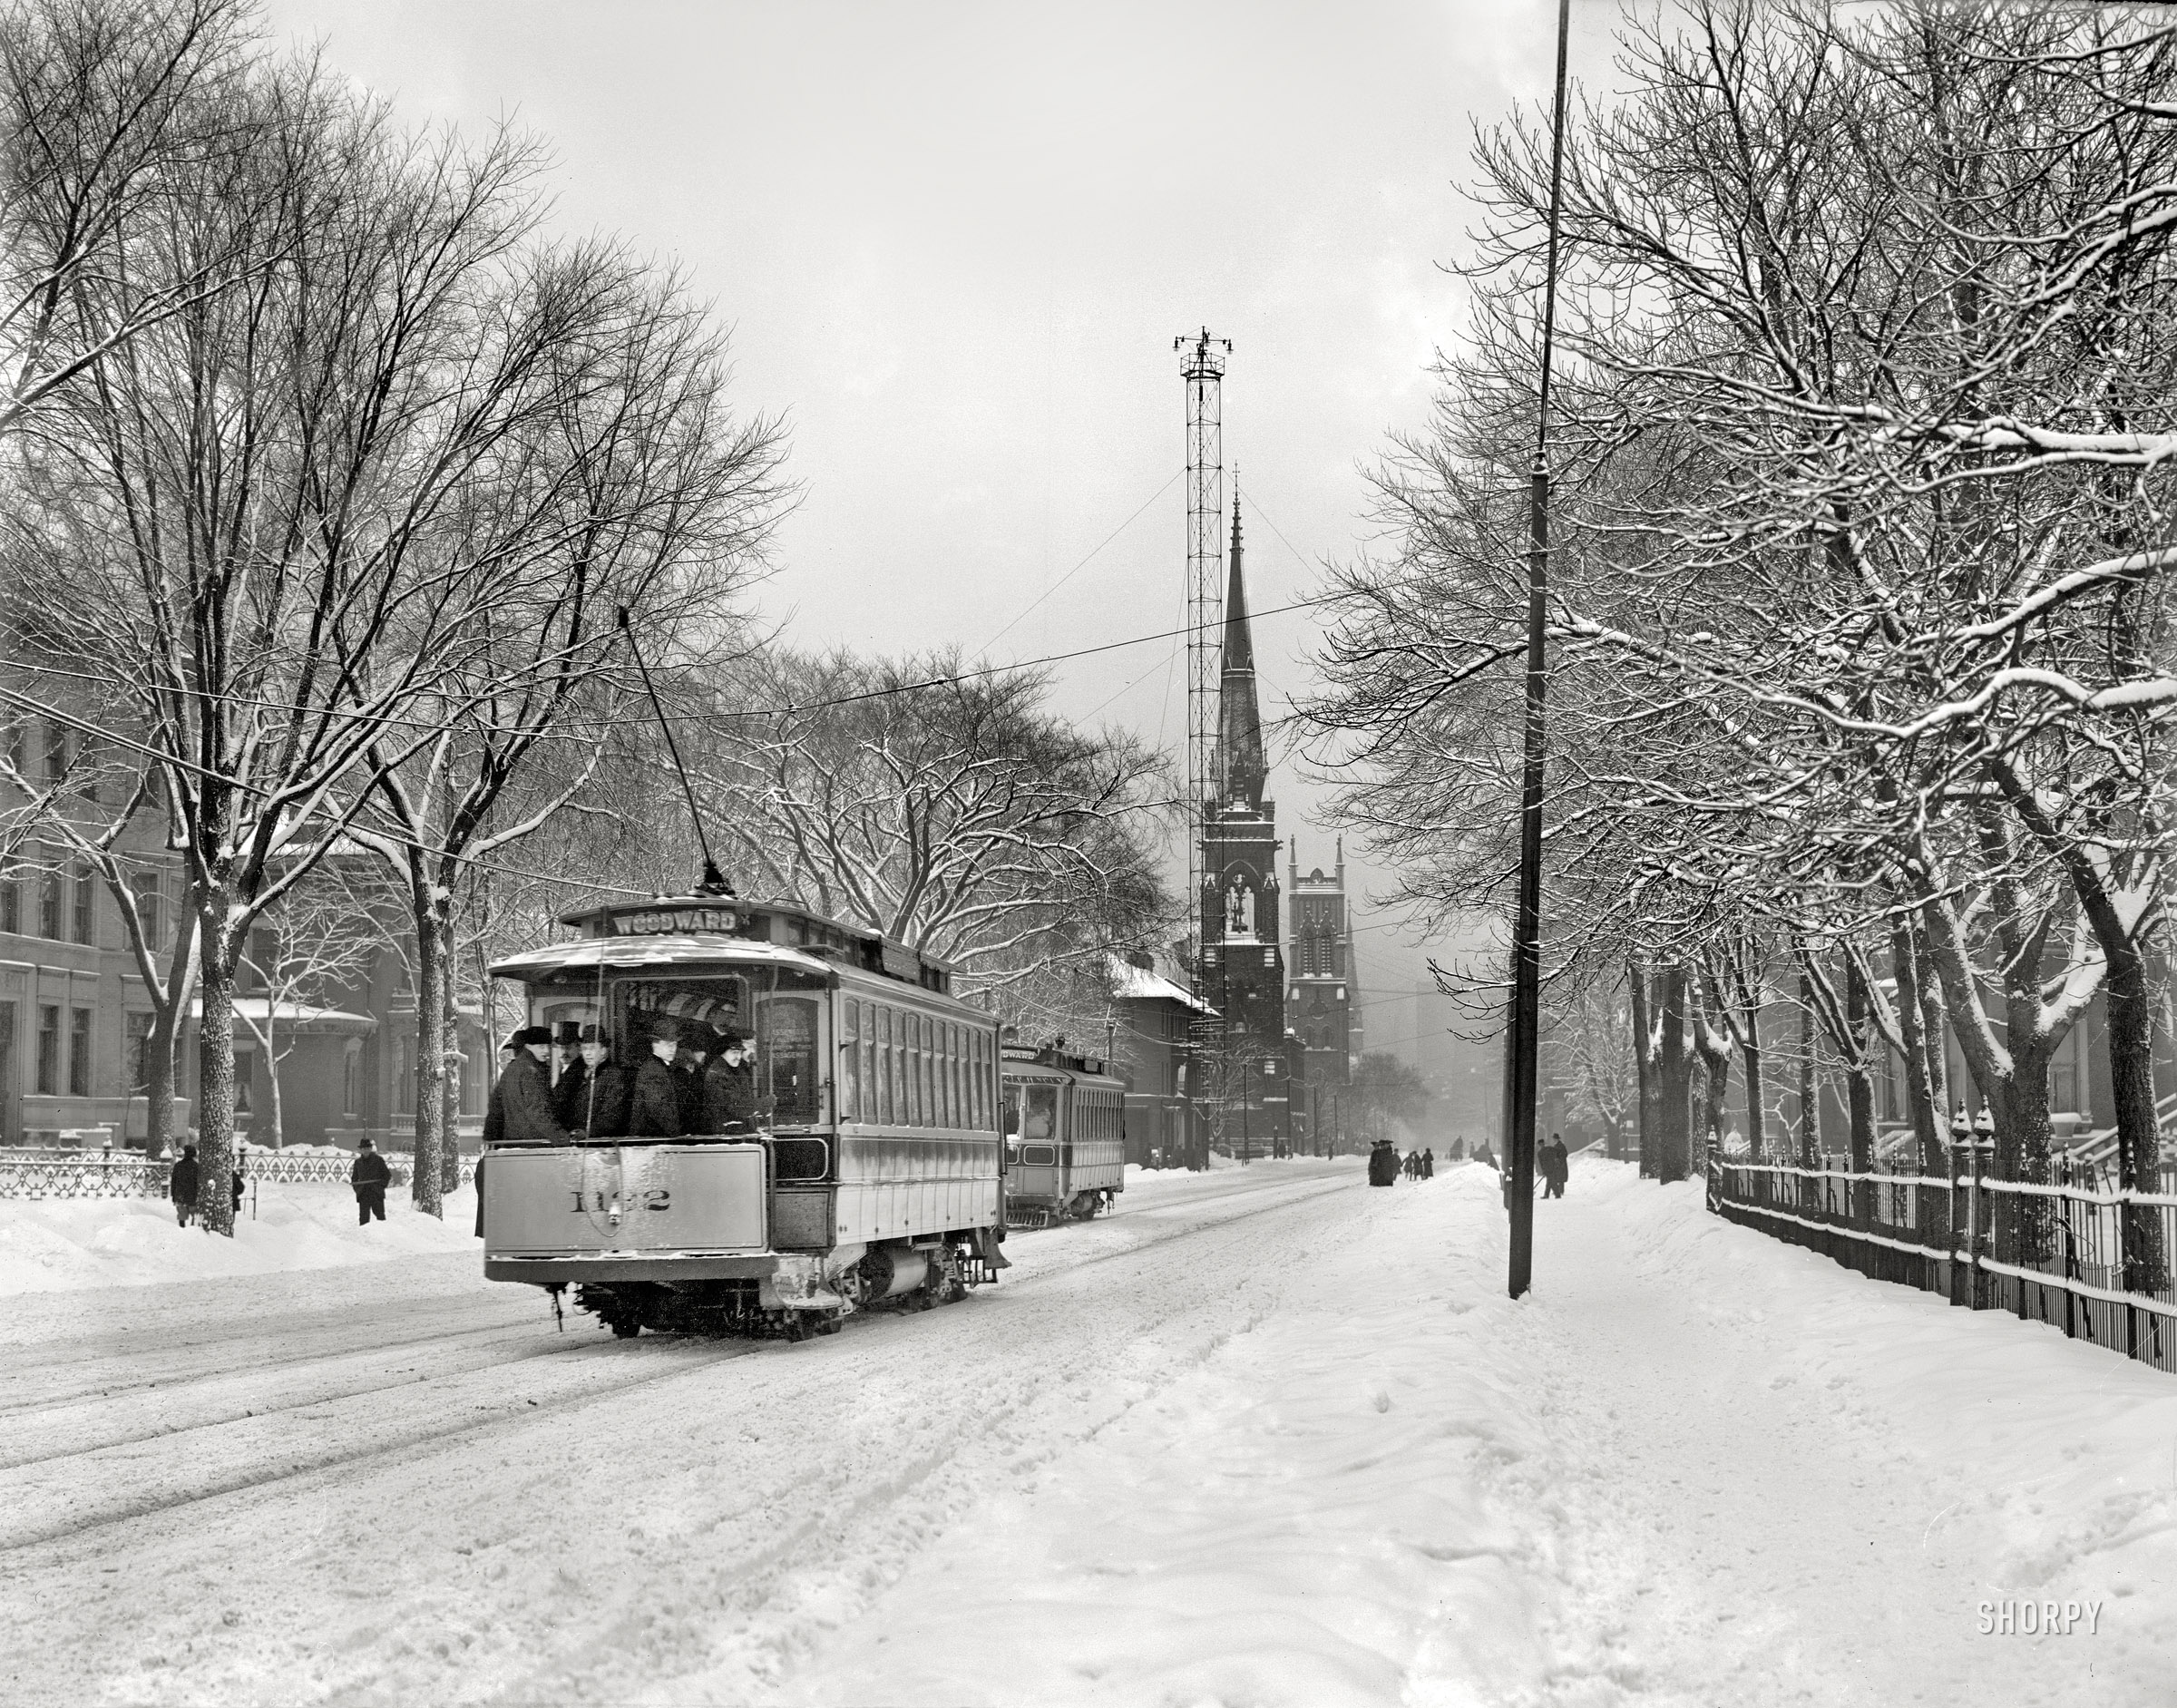 Detroit, Michigan, circa 1910. "Woodward Avenue in winter attire." Rising in front of the church is one of the city's arc-lamp "moonlight towers." View full size.